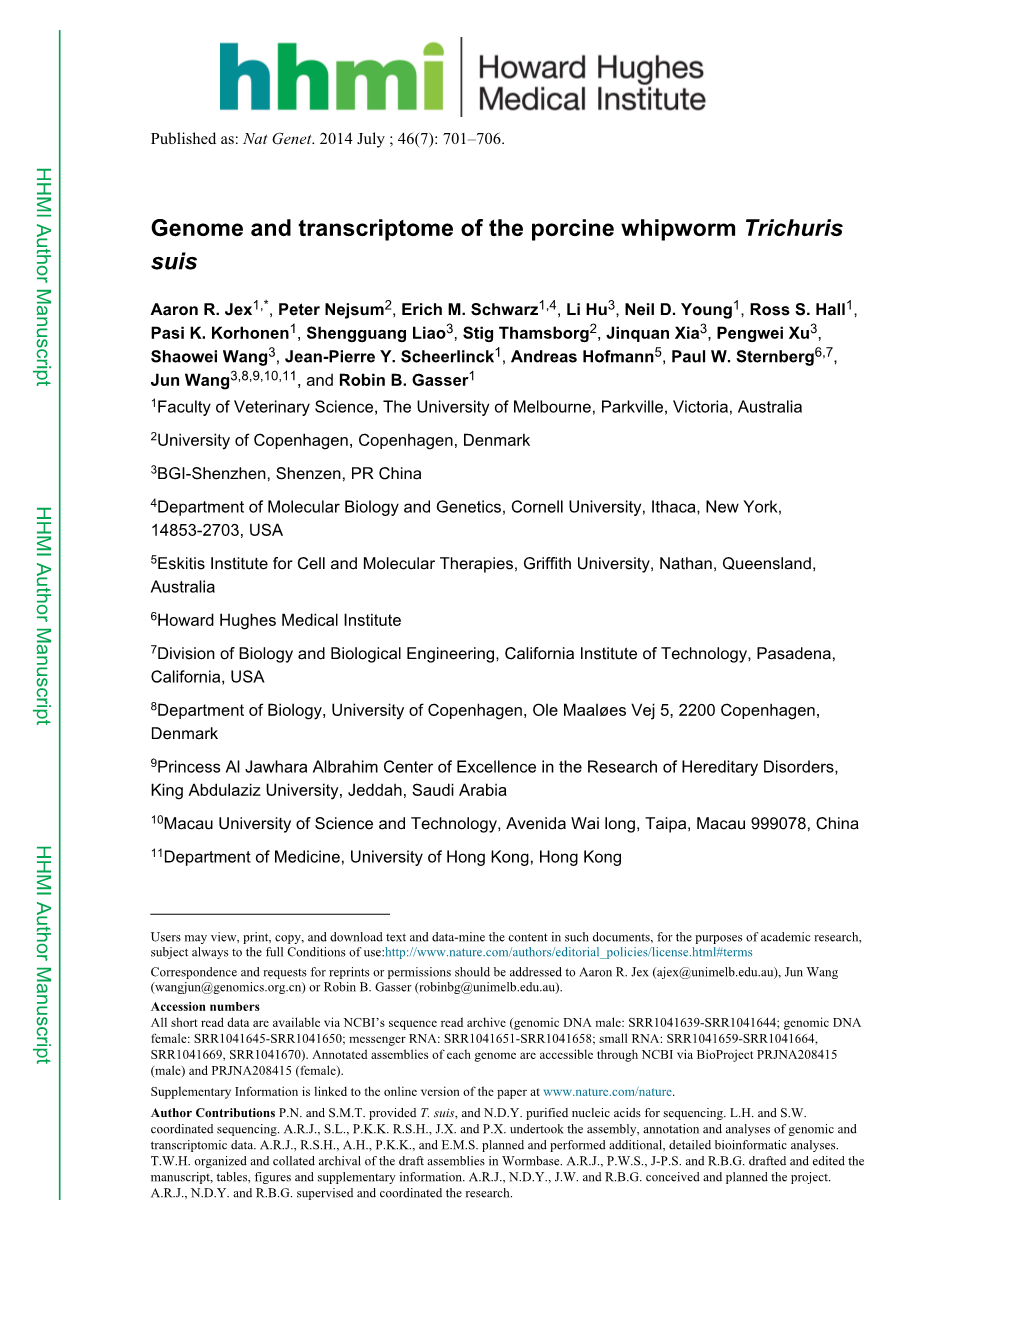 Genome and Transcriptome of the Porcine Whipworm Trichuris Suis